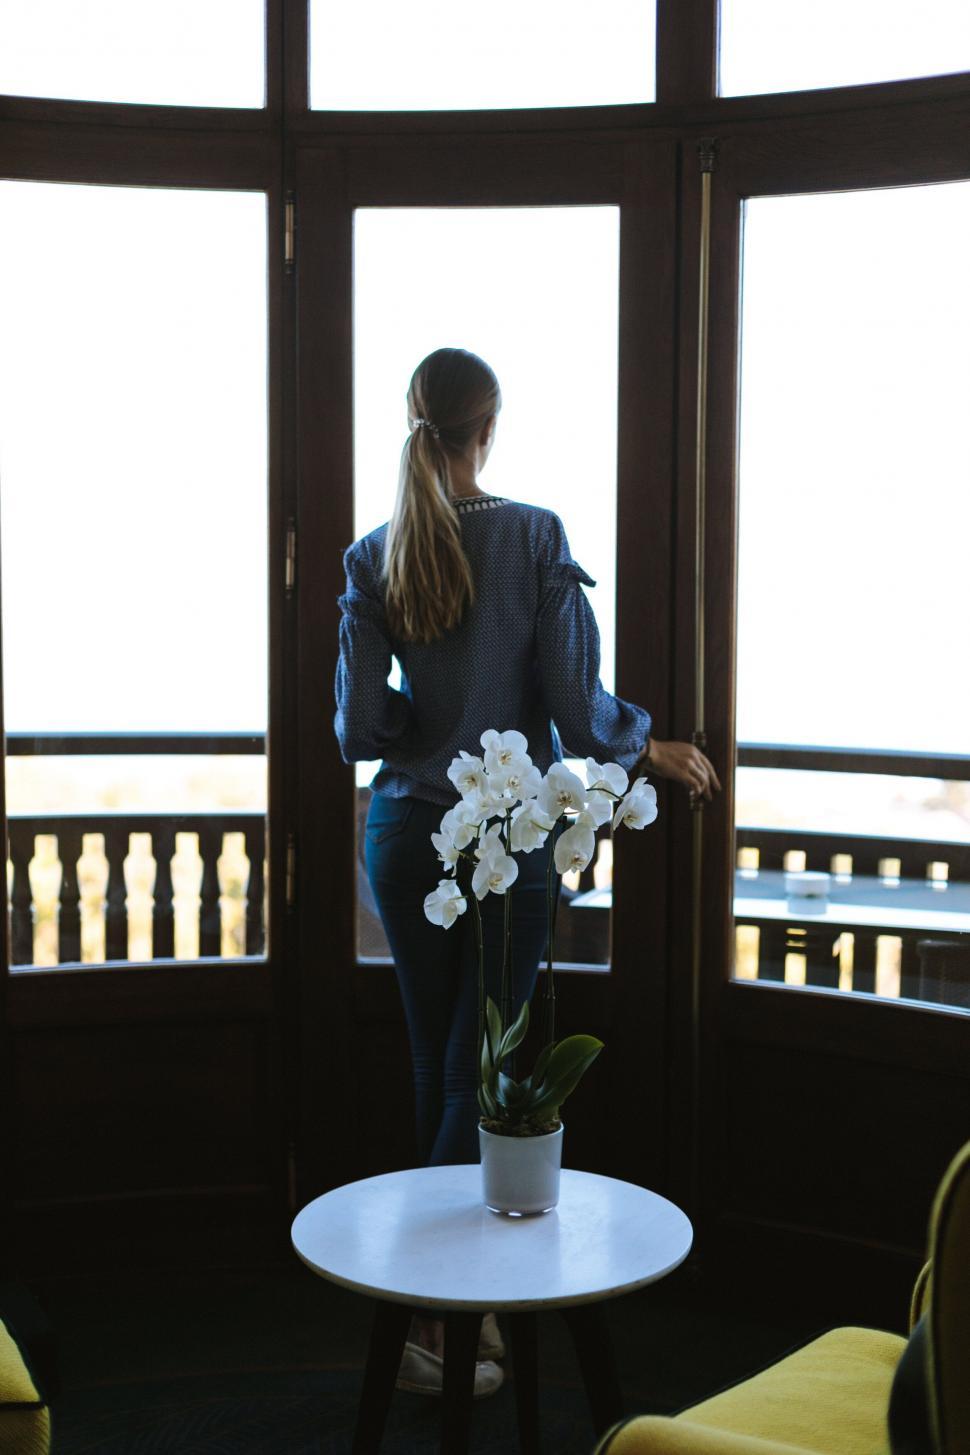 Free Image of Woman by window with plant and view 